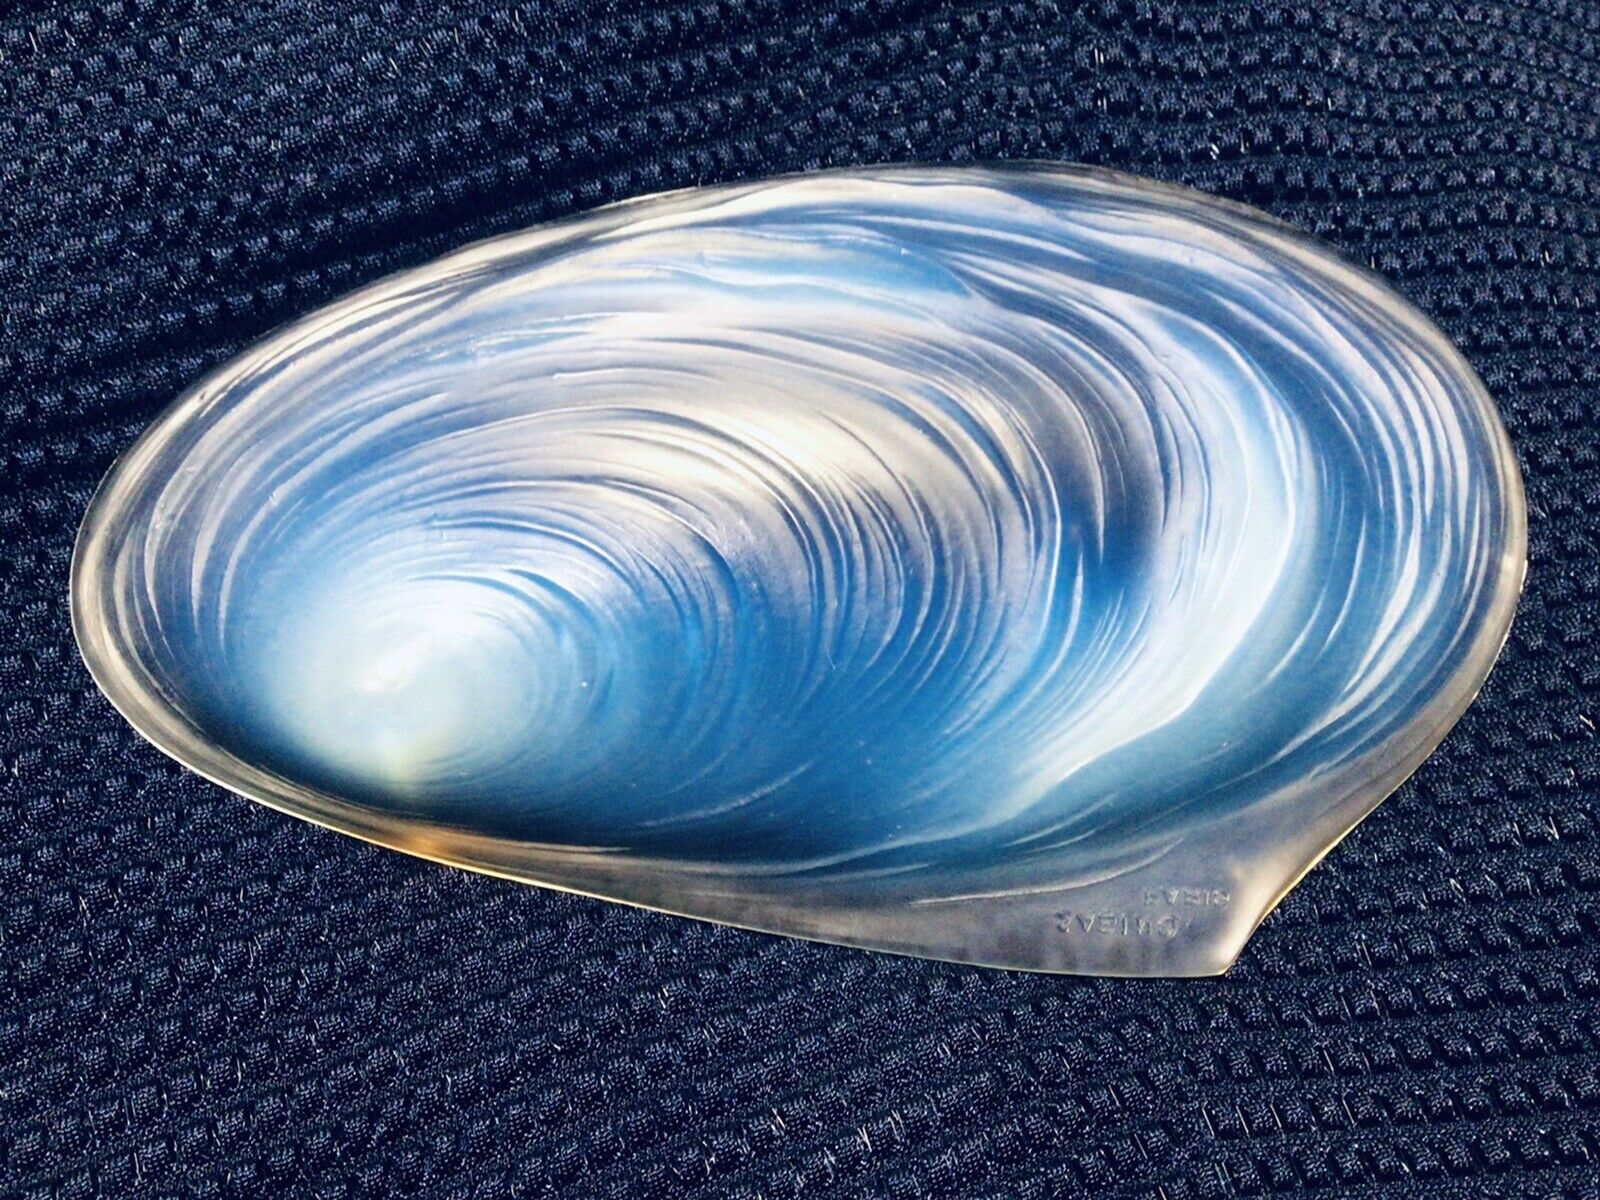 Sabino Paris Opalescent Art Deco Clam Shell Trinket Dish Coupe Coquille